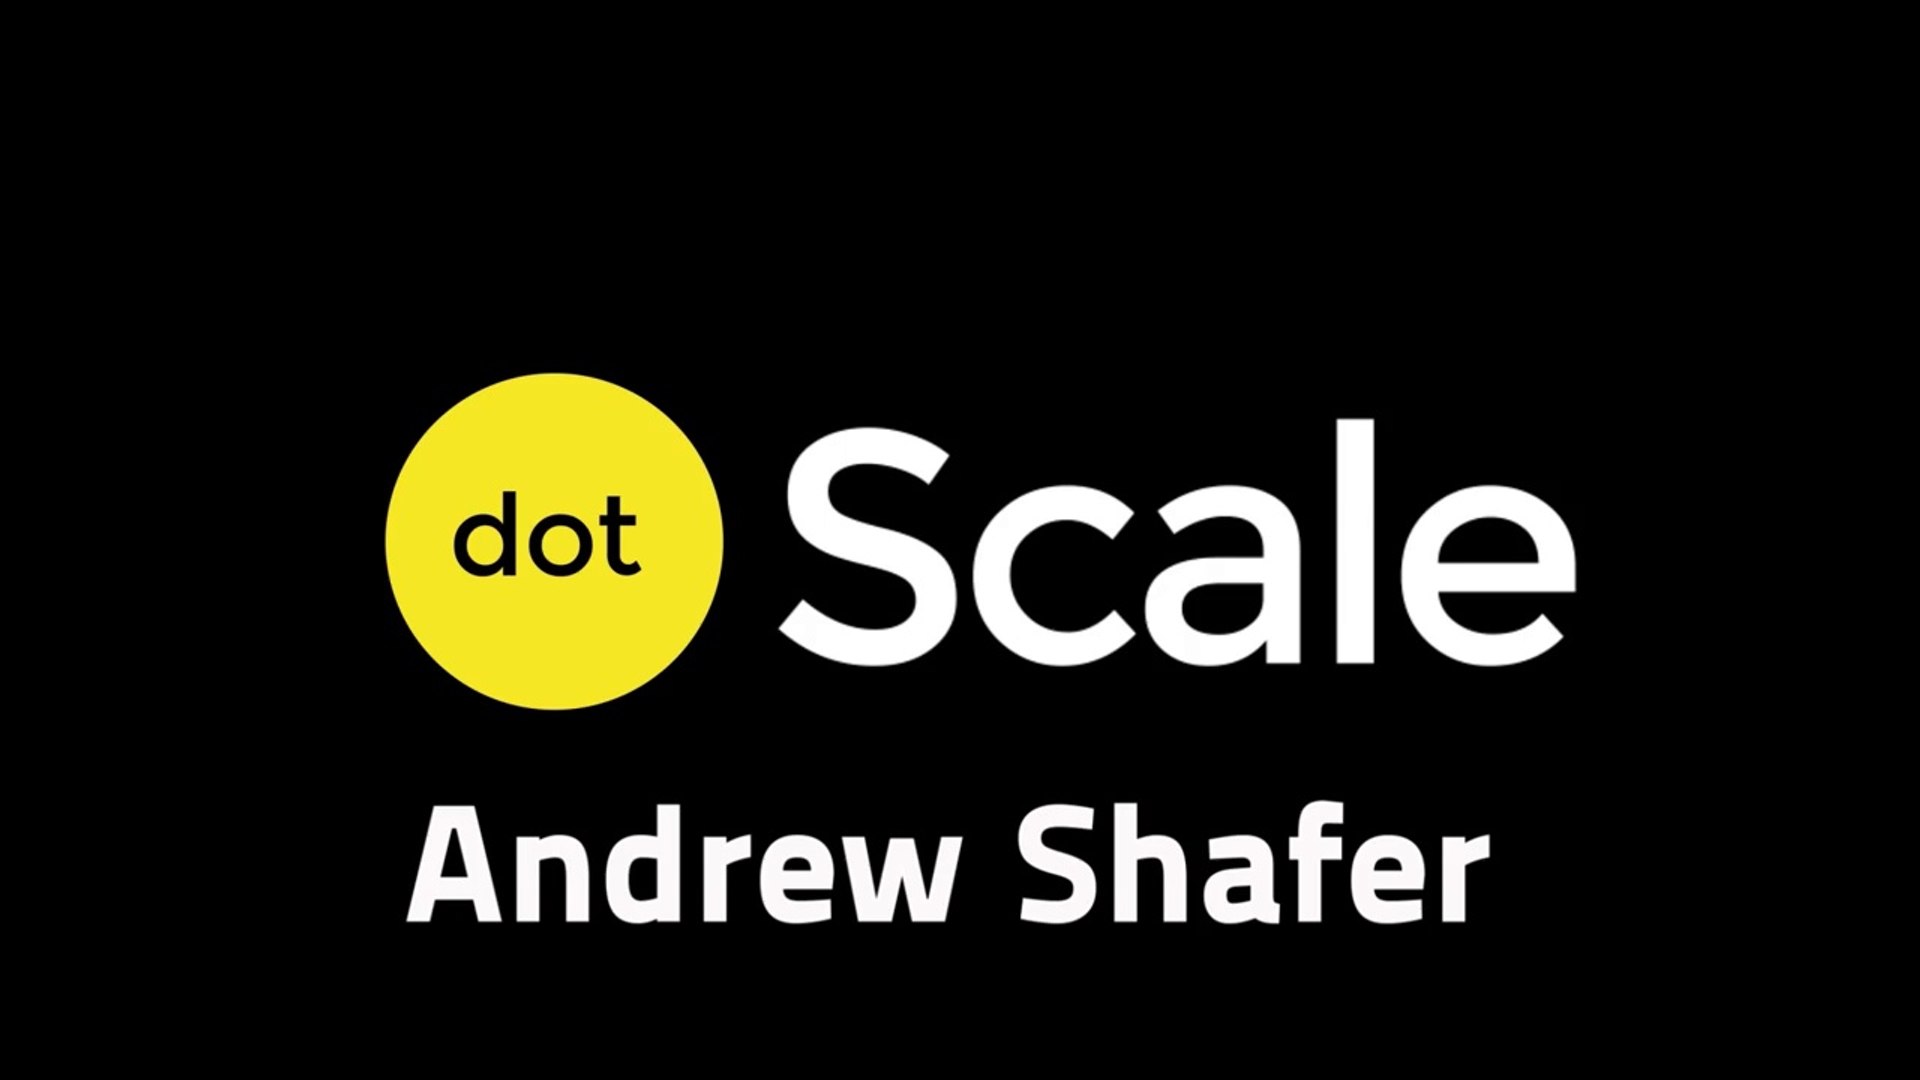 Andrew Shafer - Deep DevOps, Learning to learn, dotScale 2017